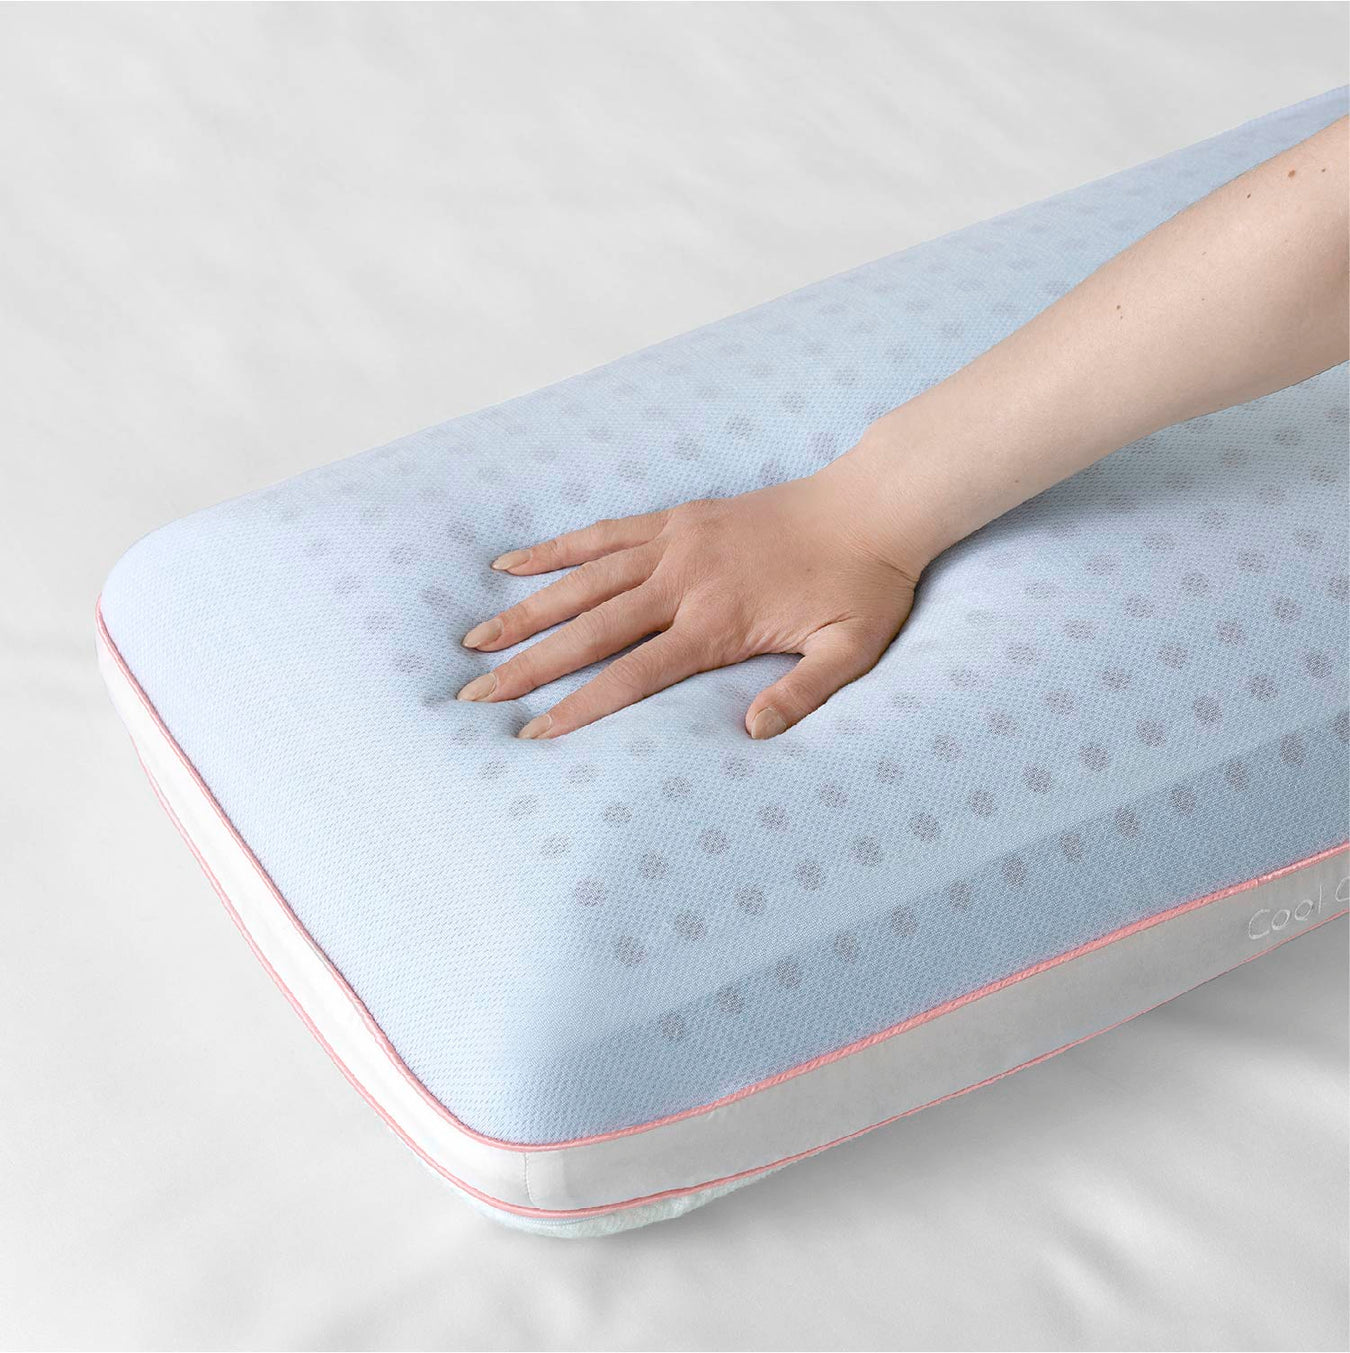 Sleeptone™ Cooling Pillows Loft Cool Control max cool cozy cool